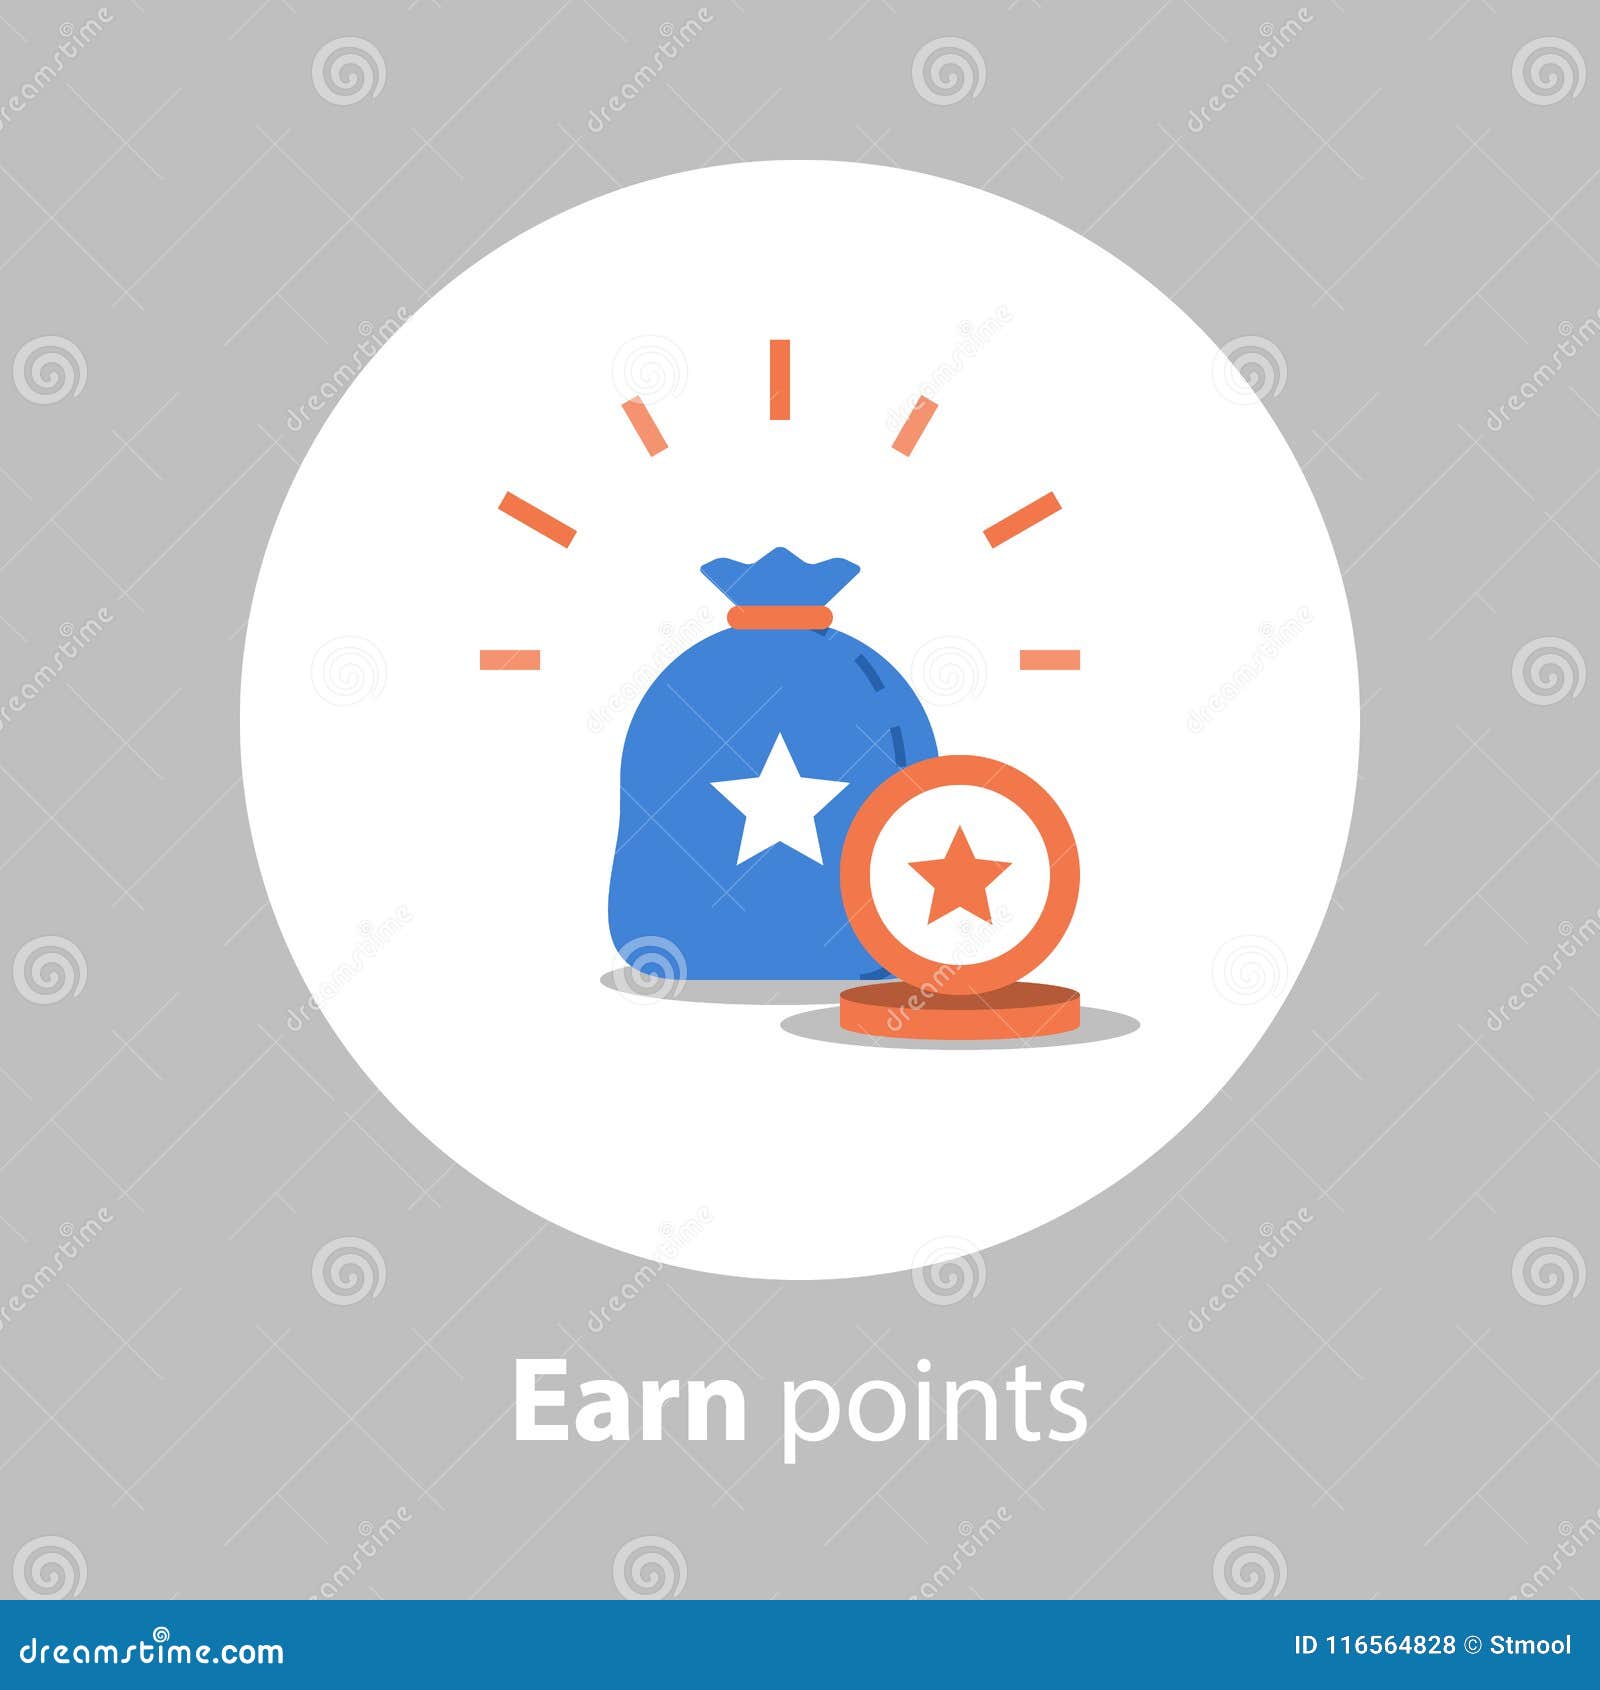 earn points, loyalty program, reward concept, collect points, flat icon